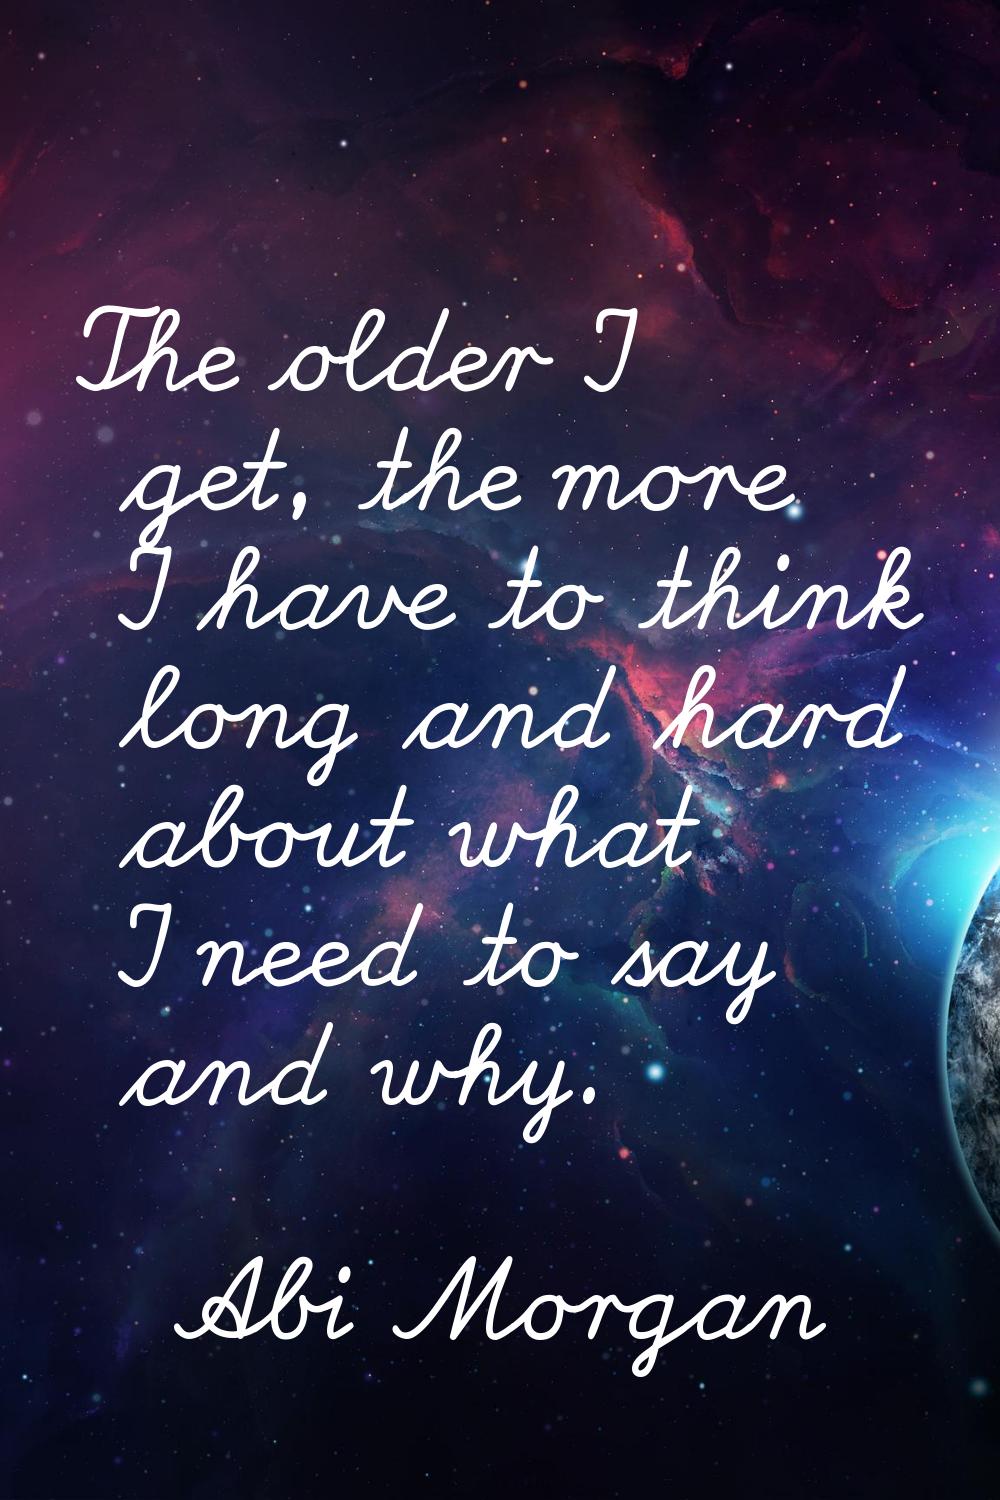 The older I get, the more I have to think long and hard about what I need to say and why.